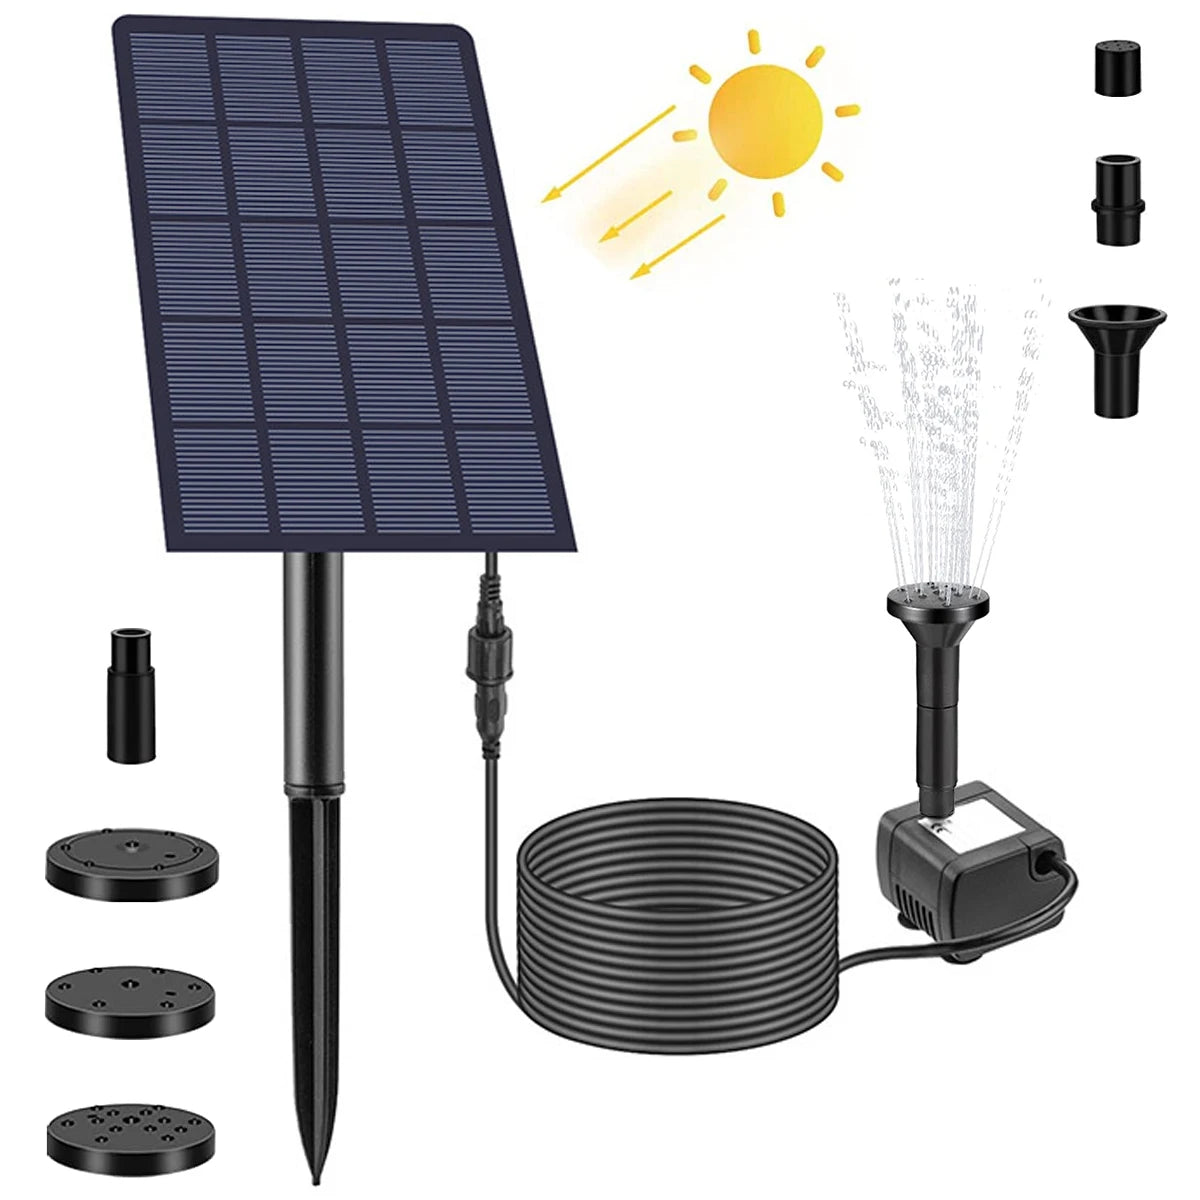 2.5W Solar Fountain, Customize water features with DIY solar pump kit and 4 interchangeable showerheads for unique spray patterns.